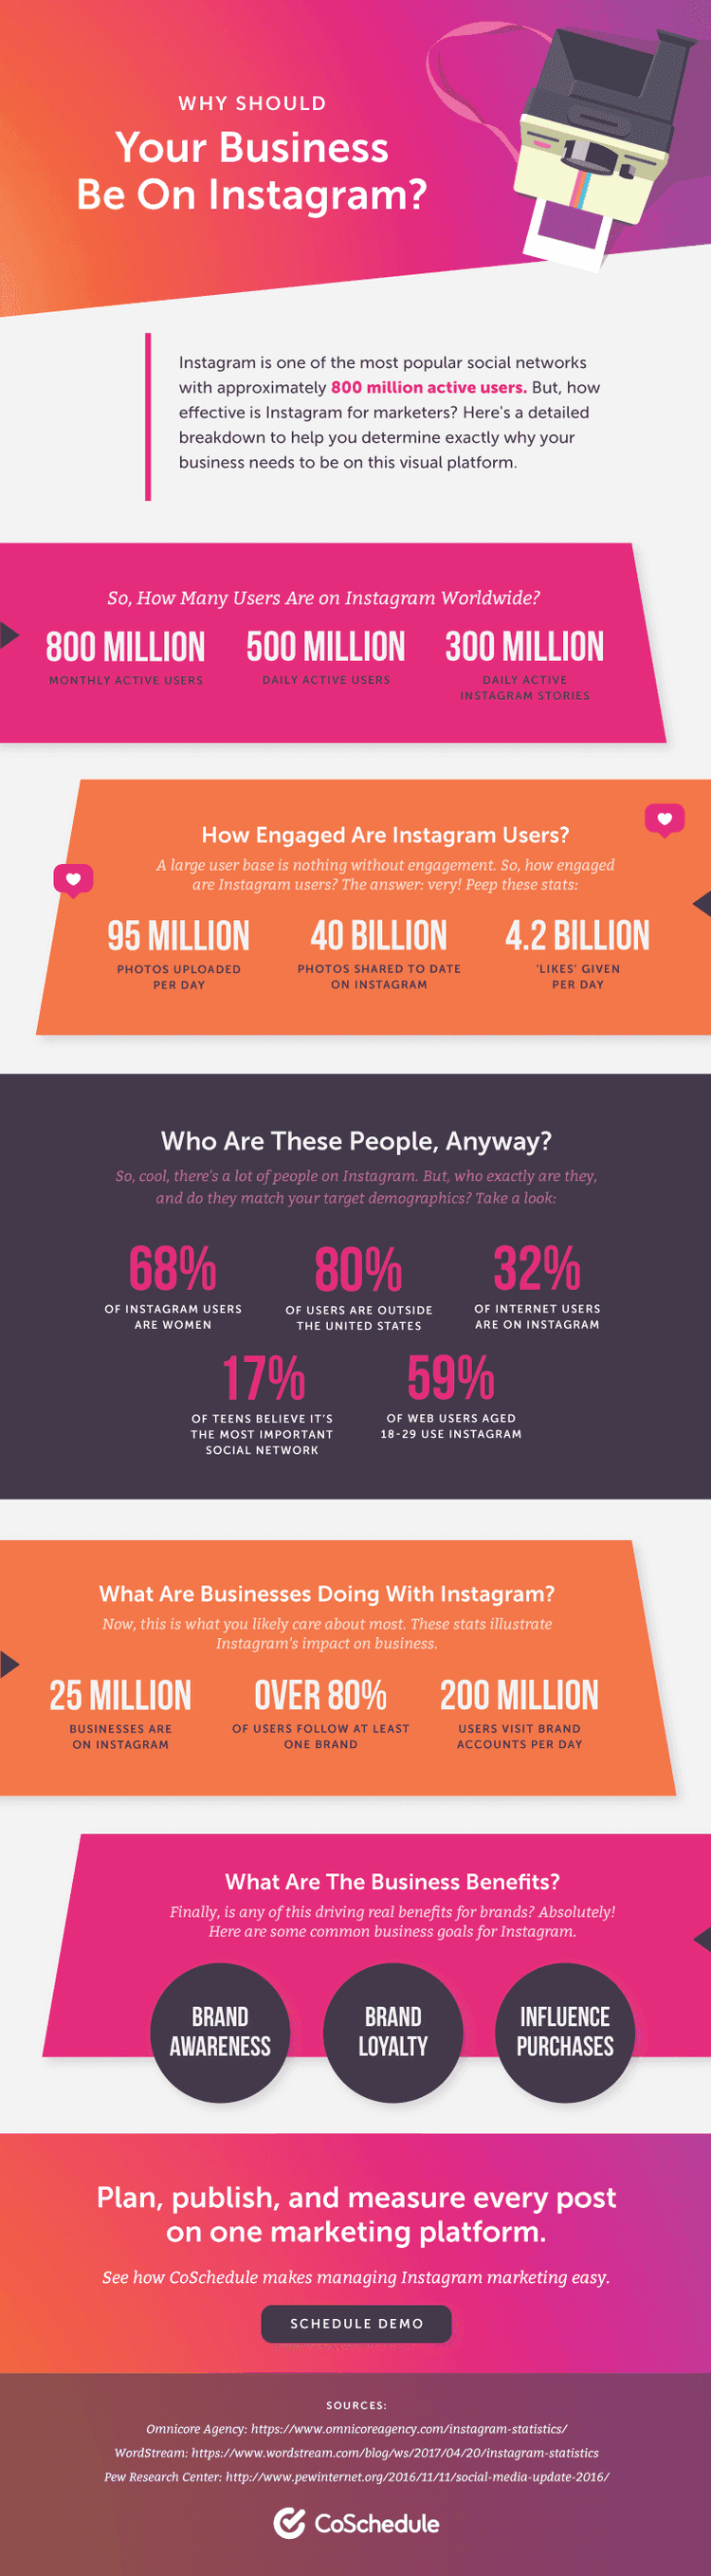 How To Use Instagram For Business The Best Guide CoSchedule